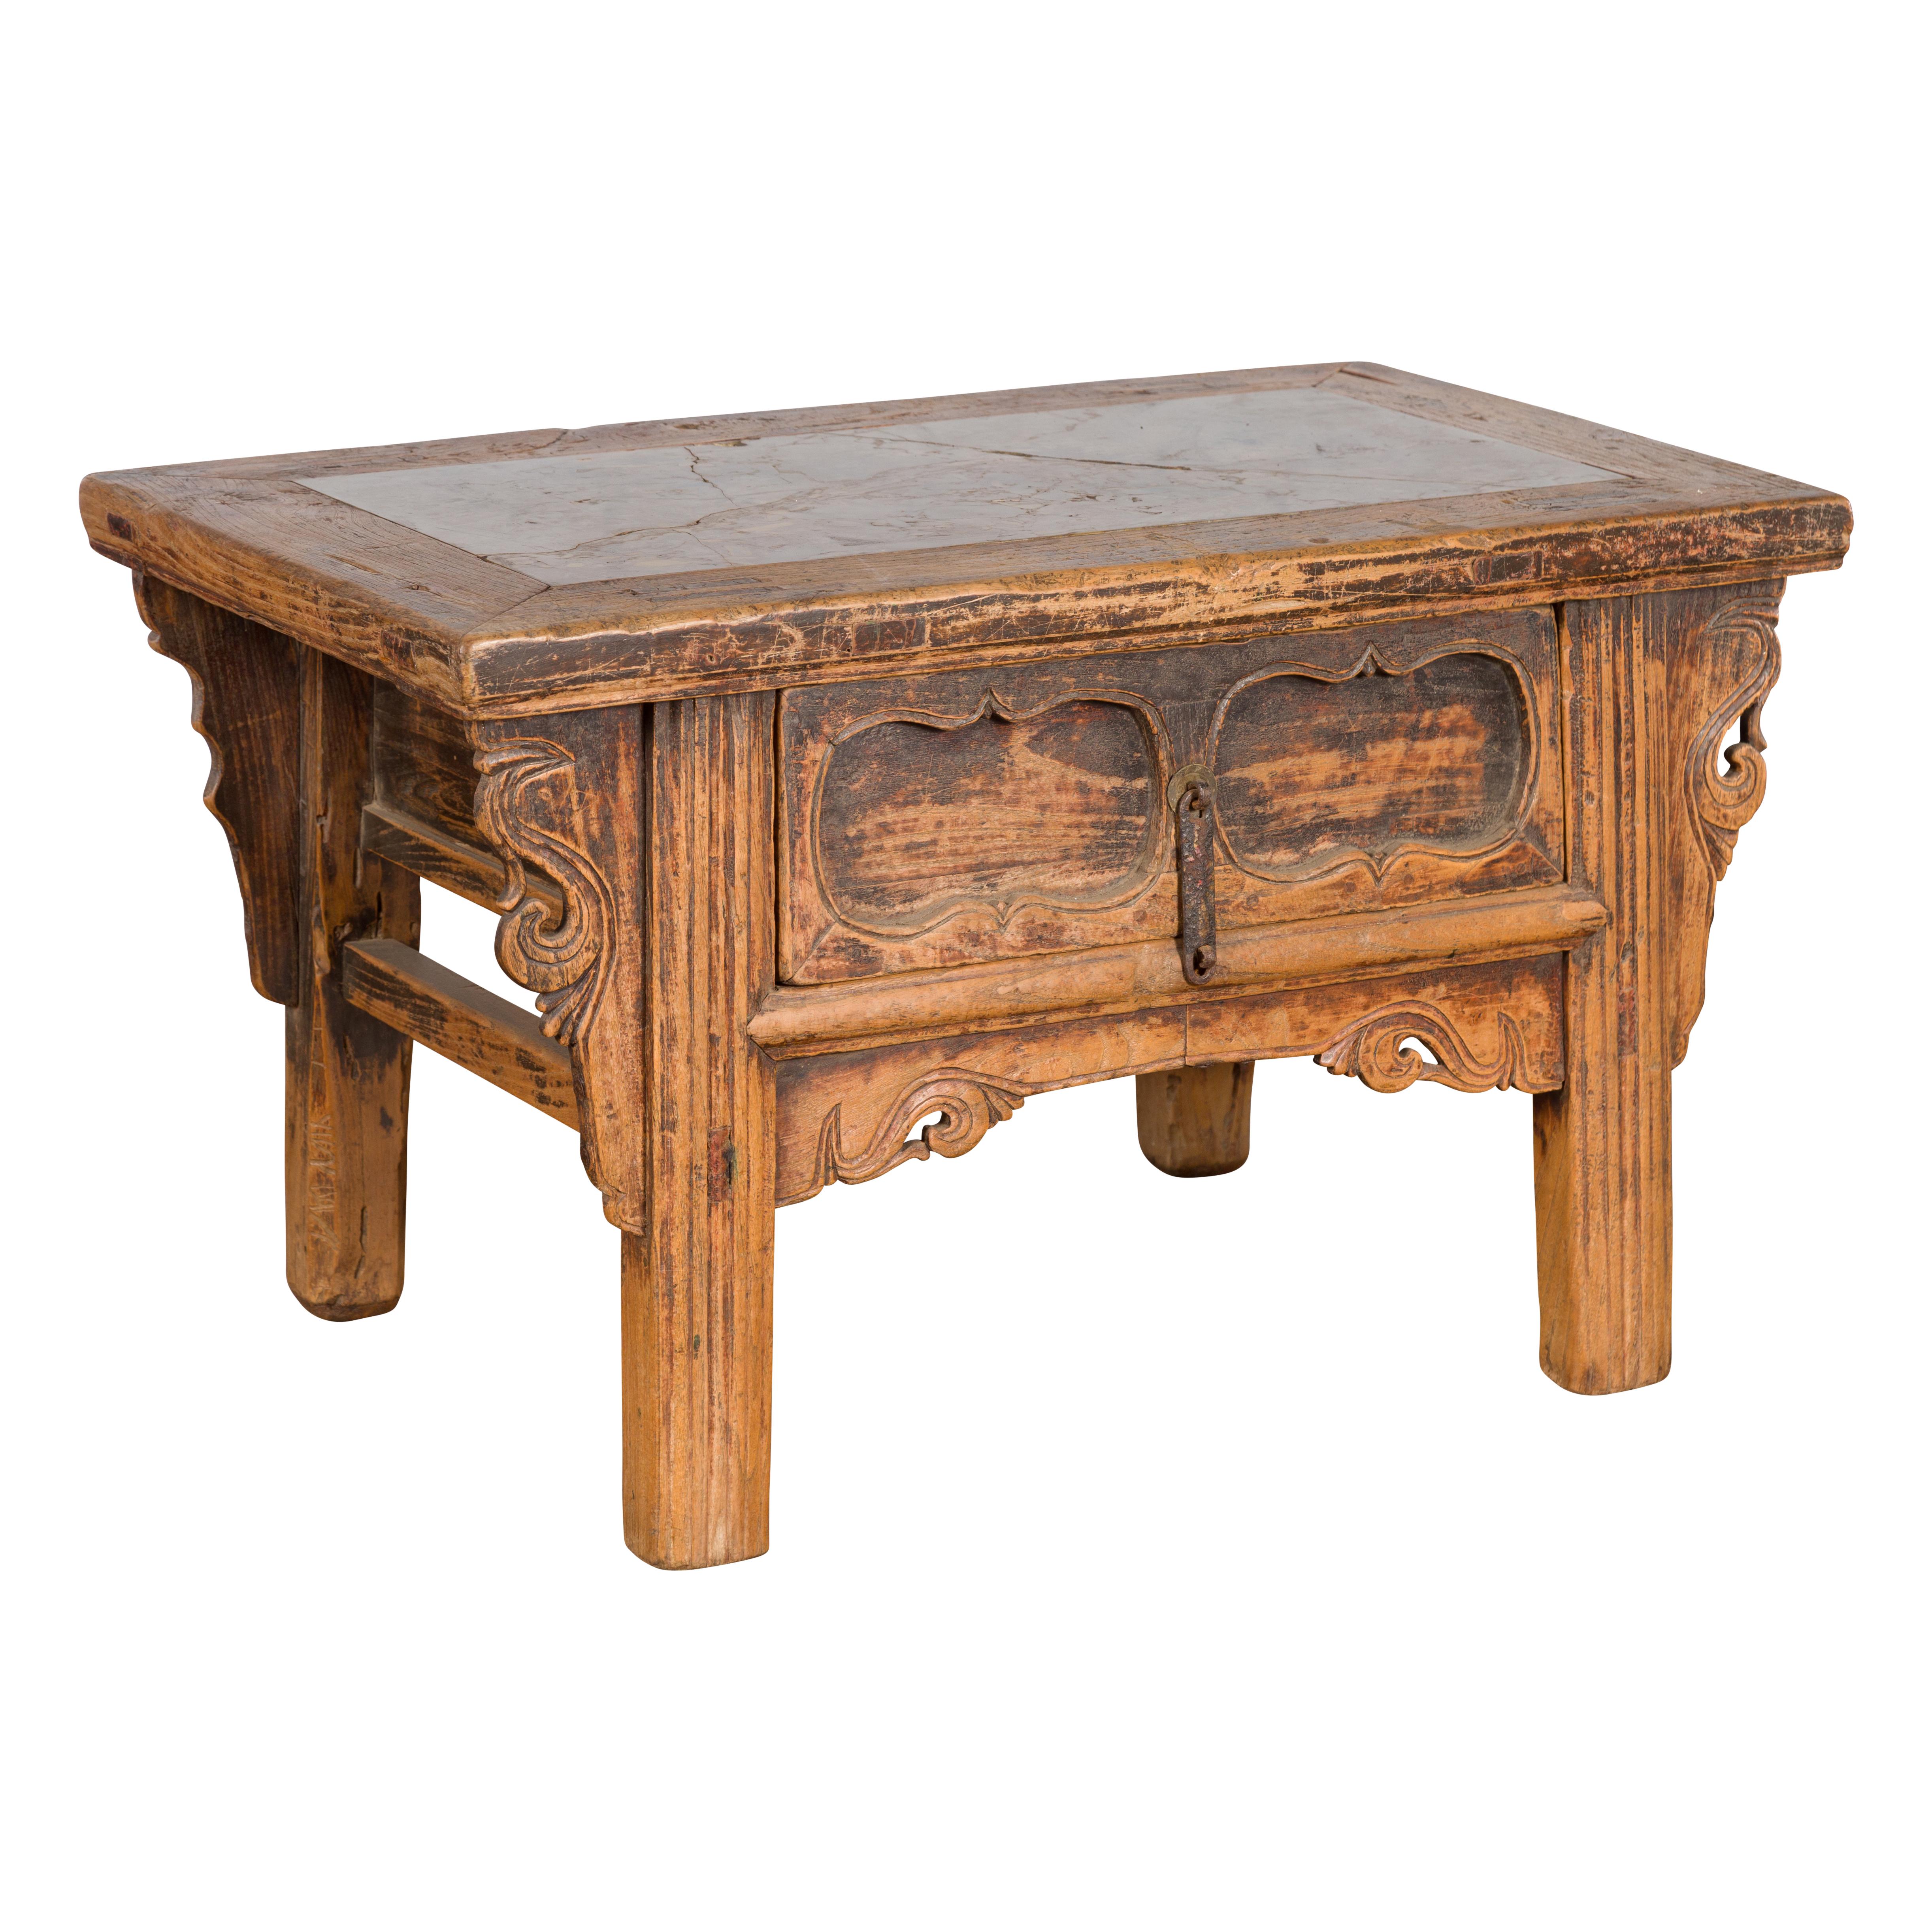 A Chinese Qing Dynasty low elm table from the 19th century, with Ming stone inset, carved spandrels and recessed cartouches. Created in China during the Qing Dynasty period, this elm table features a rectangular top with Ming stone inset, sitting